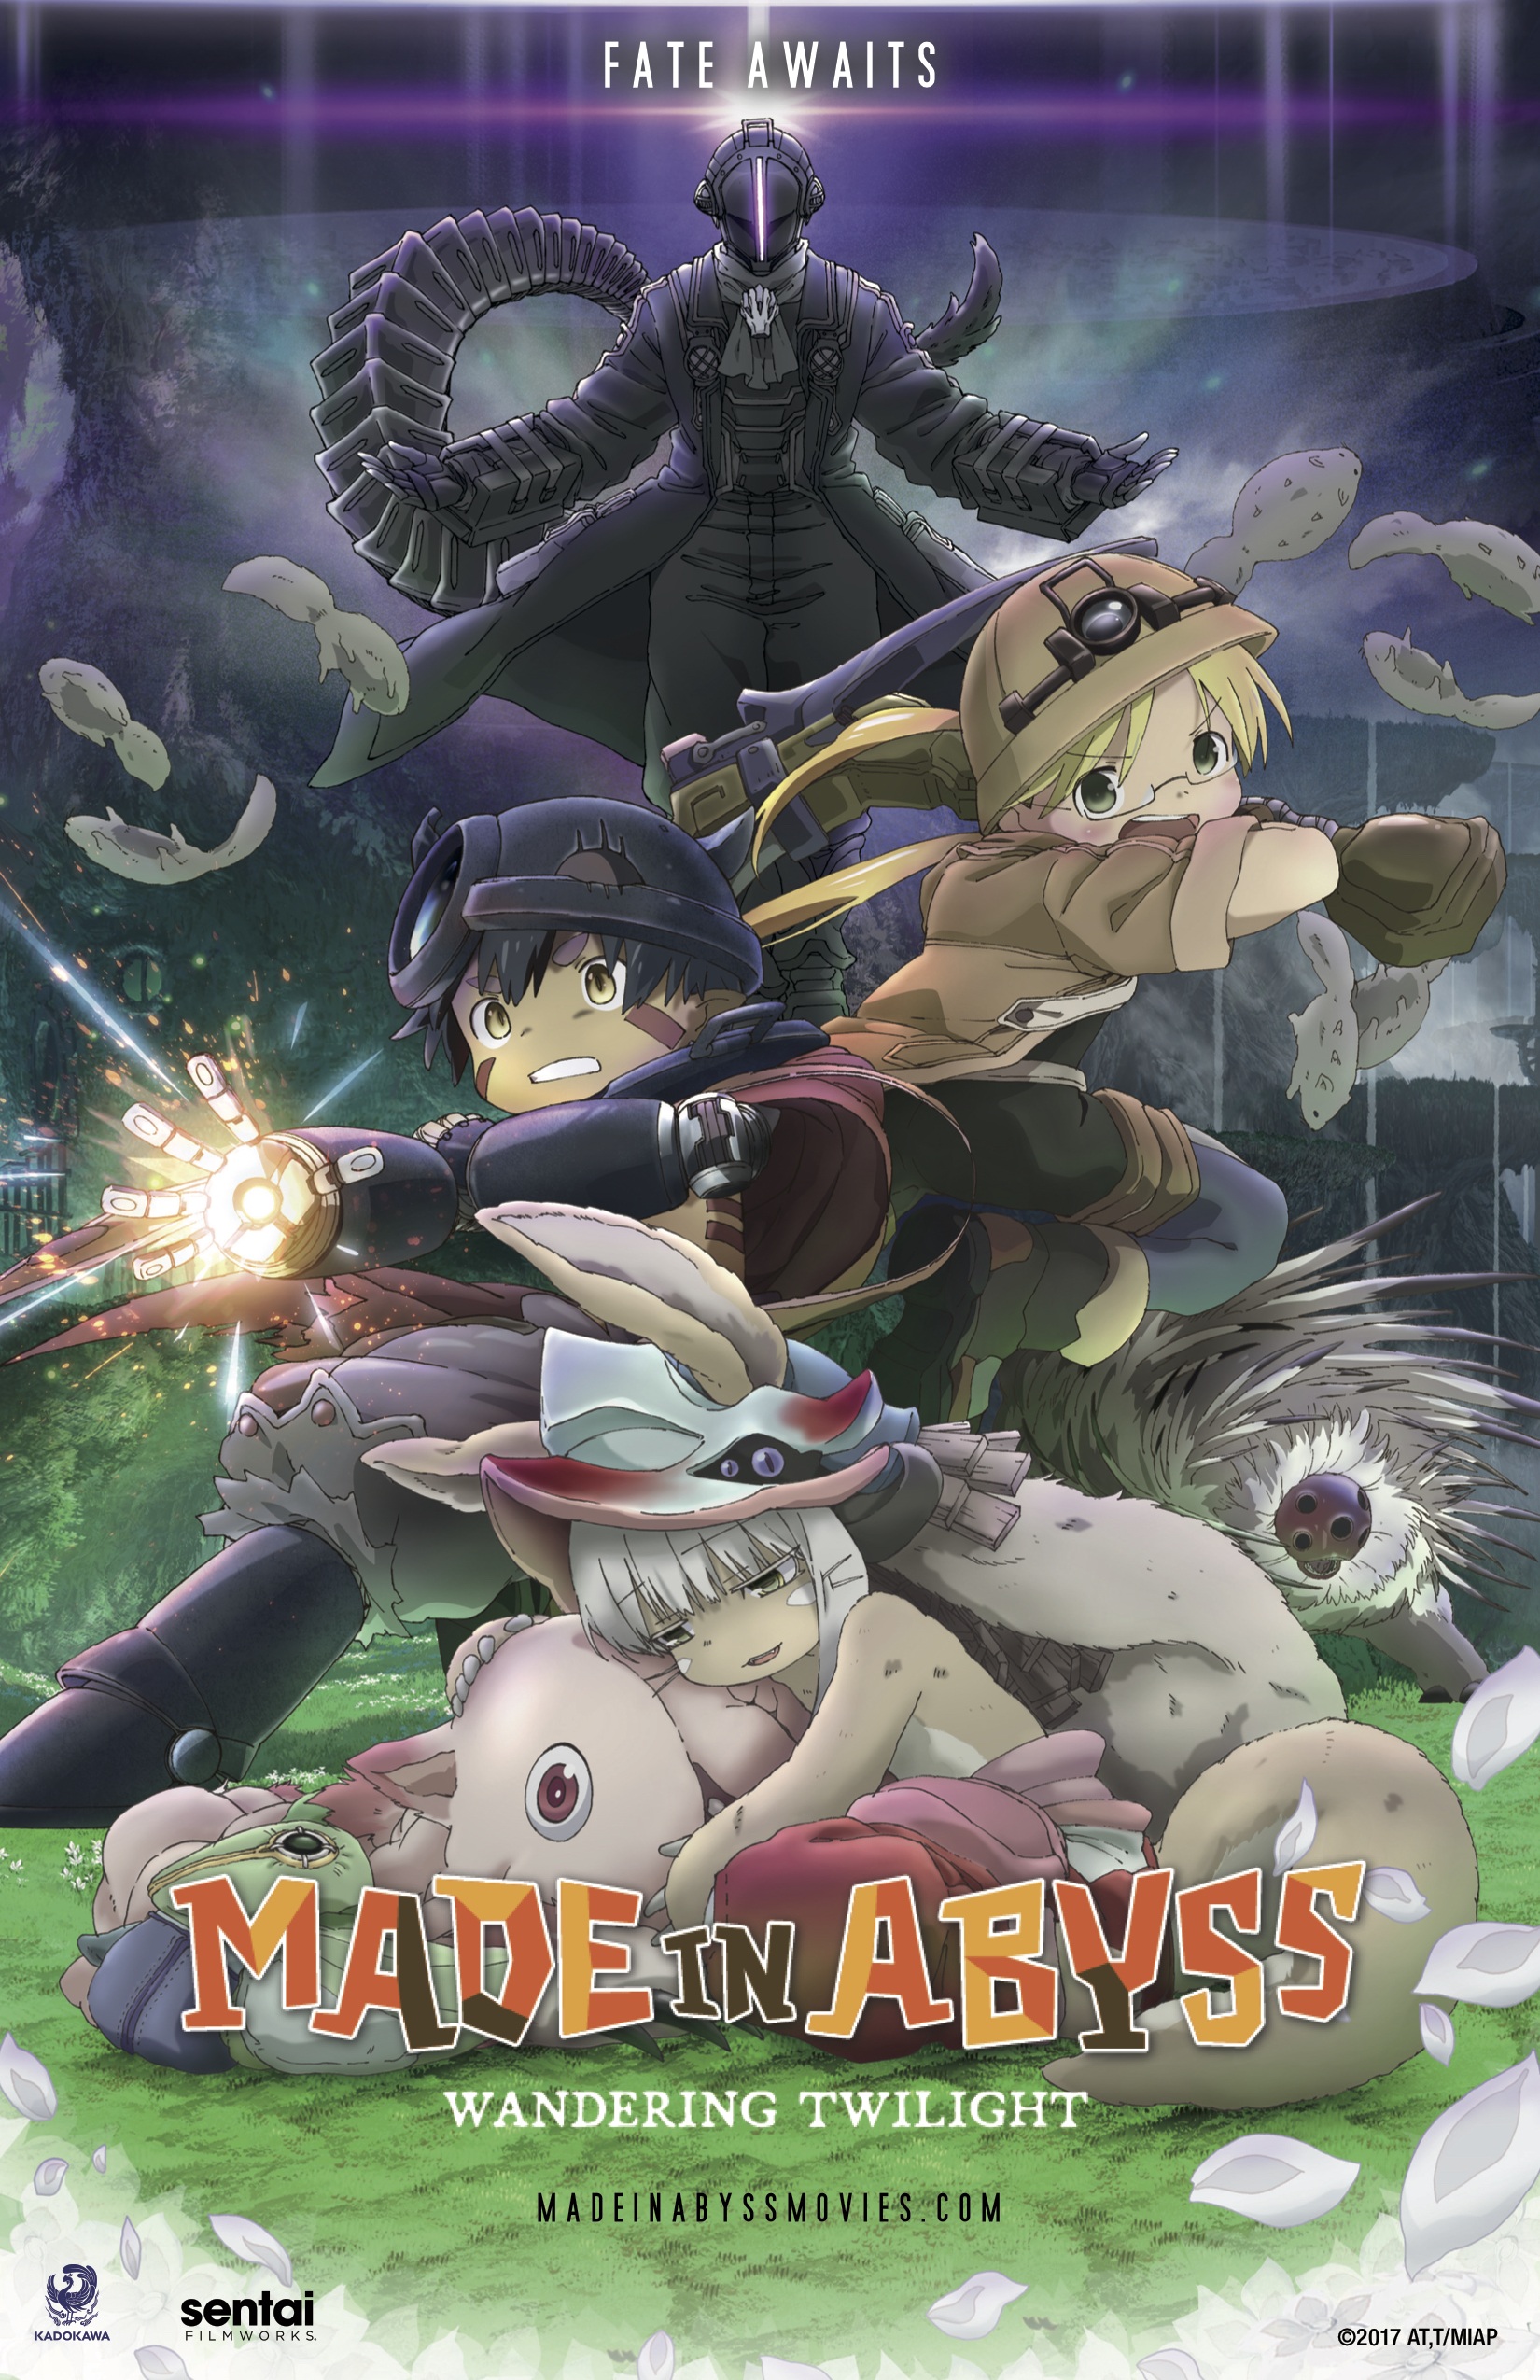 Watch MADE IN ABYSS: Dawn of the Deep Soul